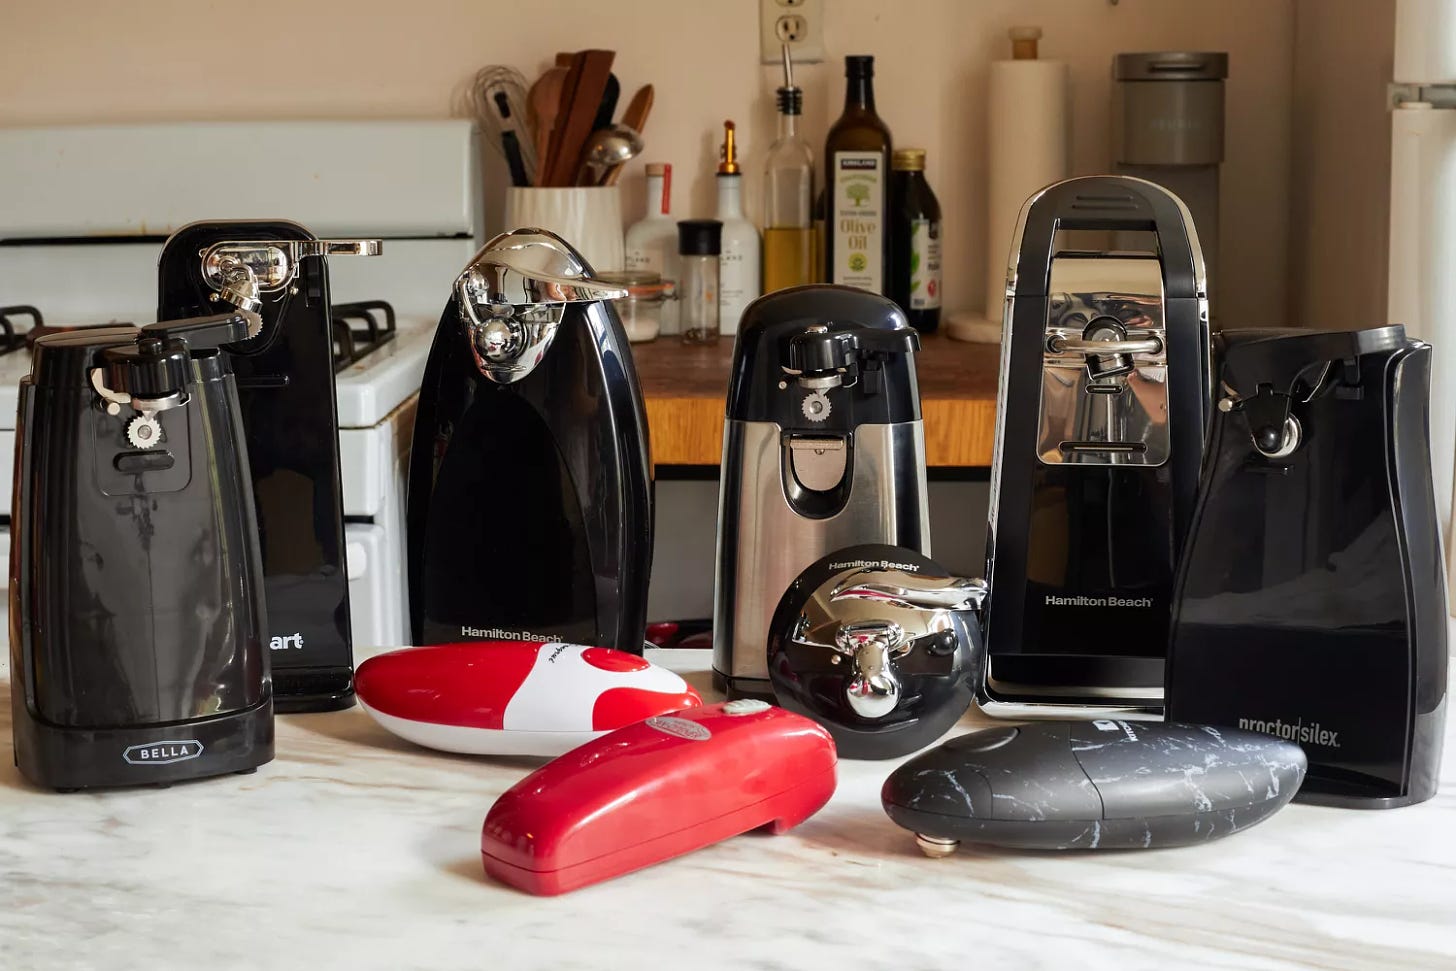 A group of electric can openers on a kitchen countertop